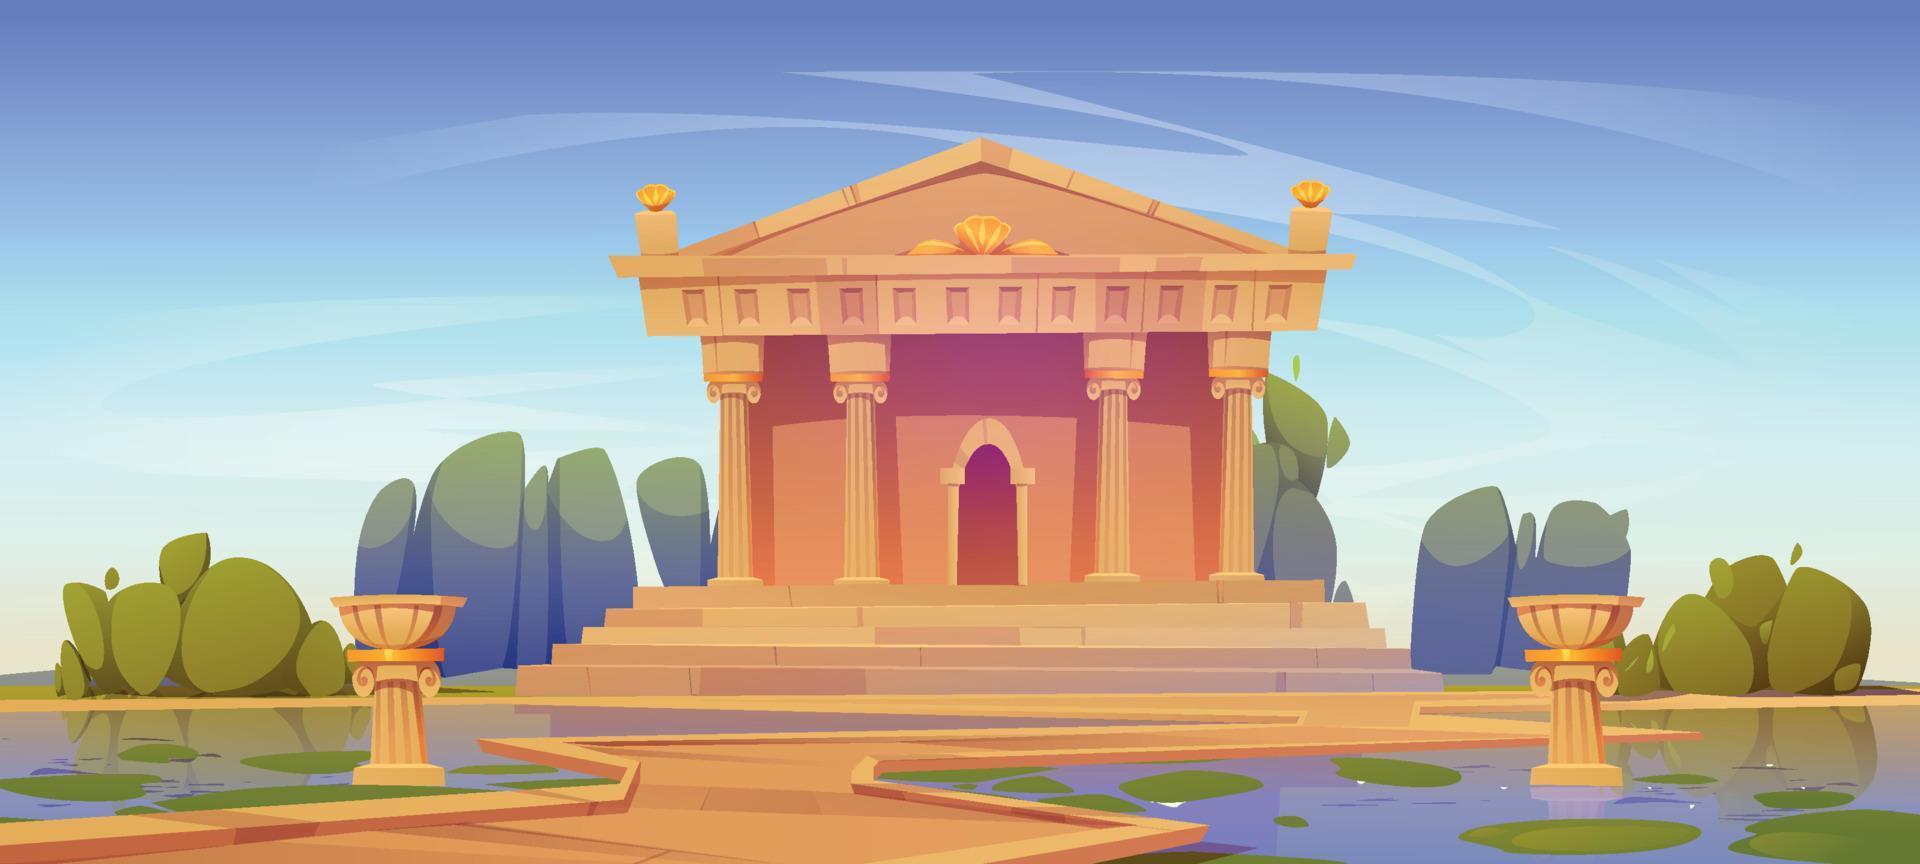 Greek or roman temple building with columns vector